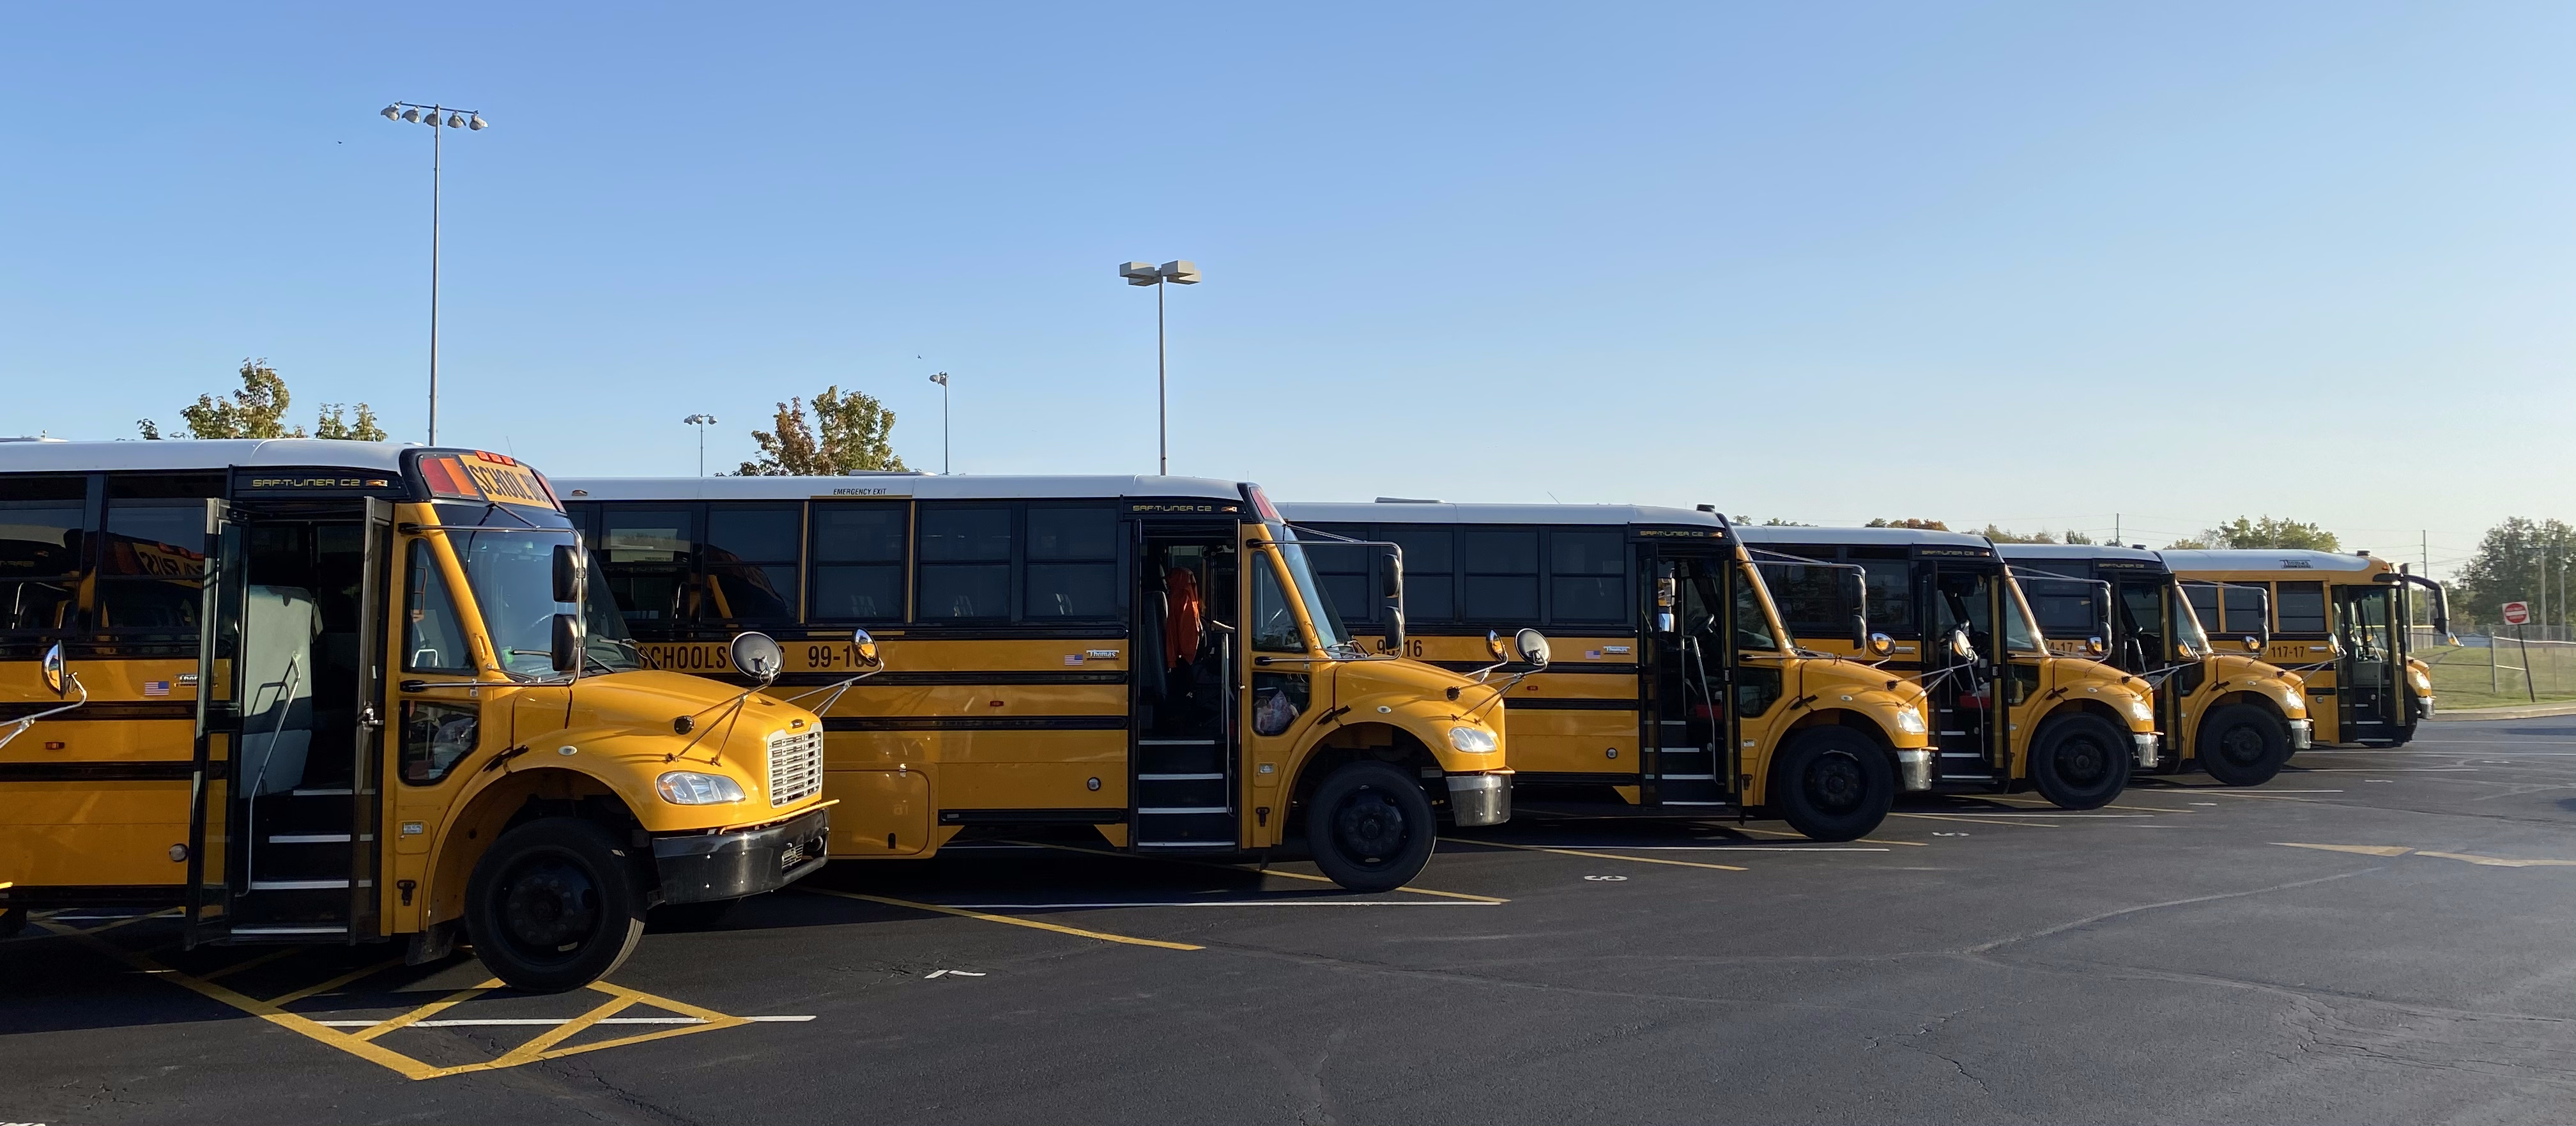 Buses lined up in a parking lot